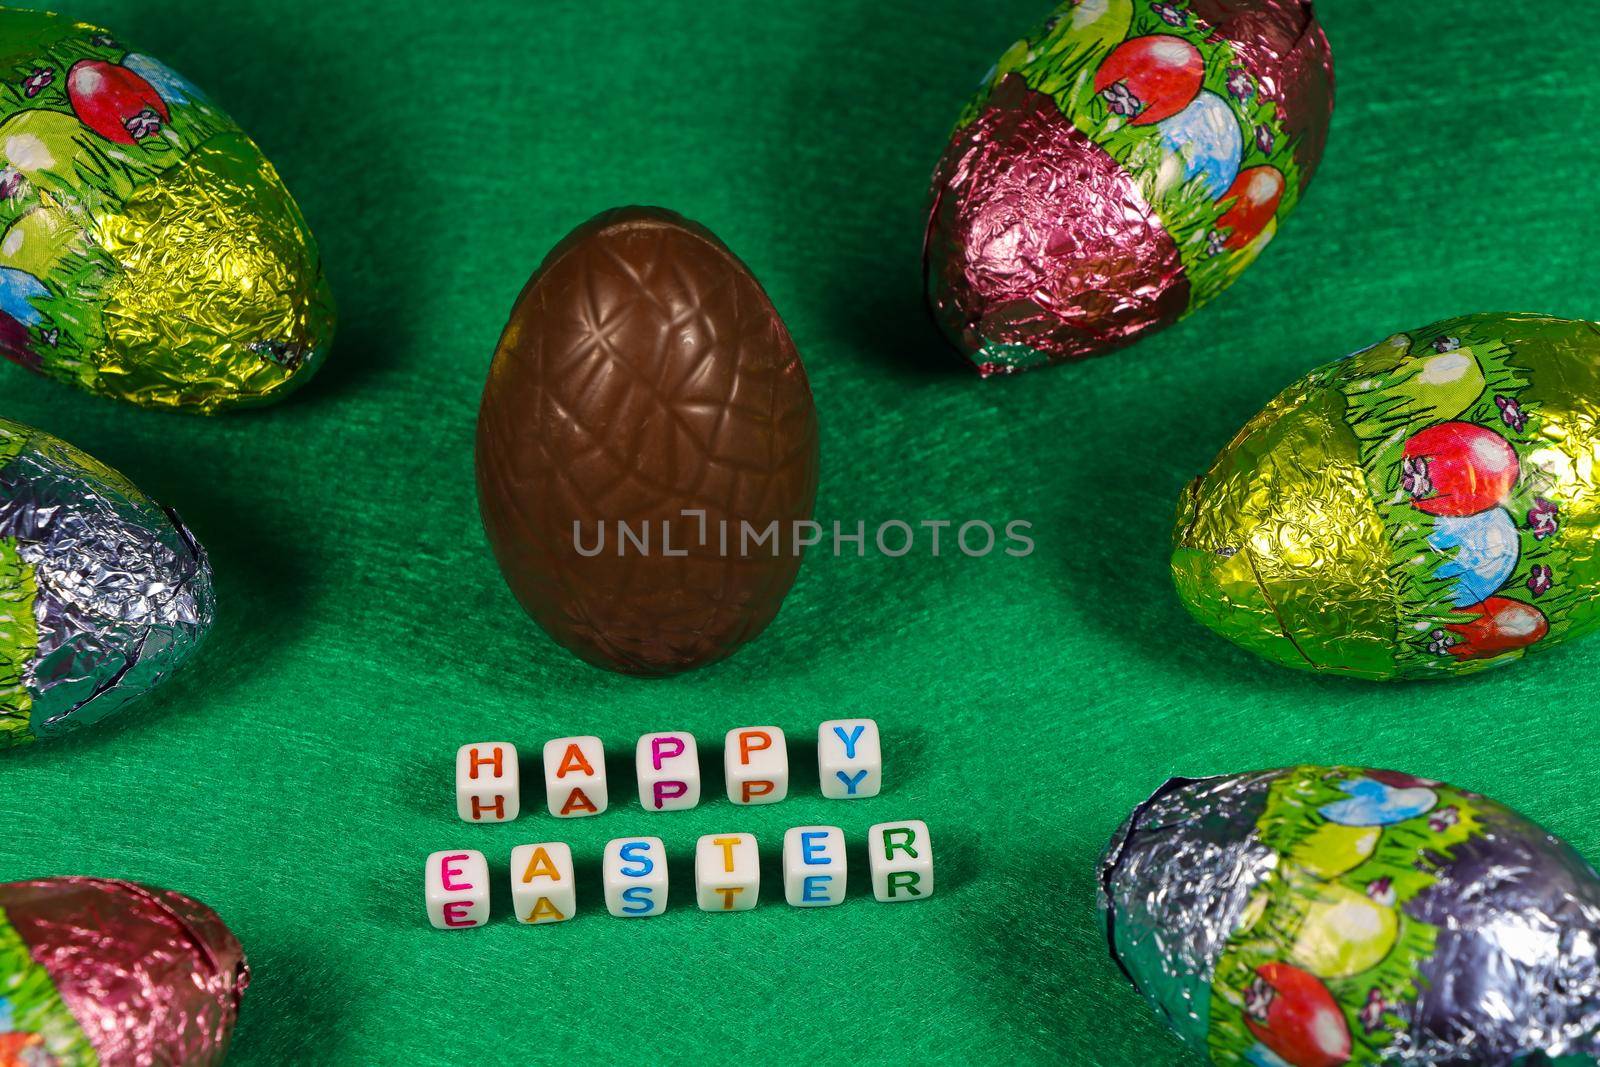 Happy Easter text with chocolate egg and colorful foil wrapped eggs on green